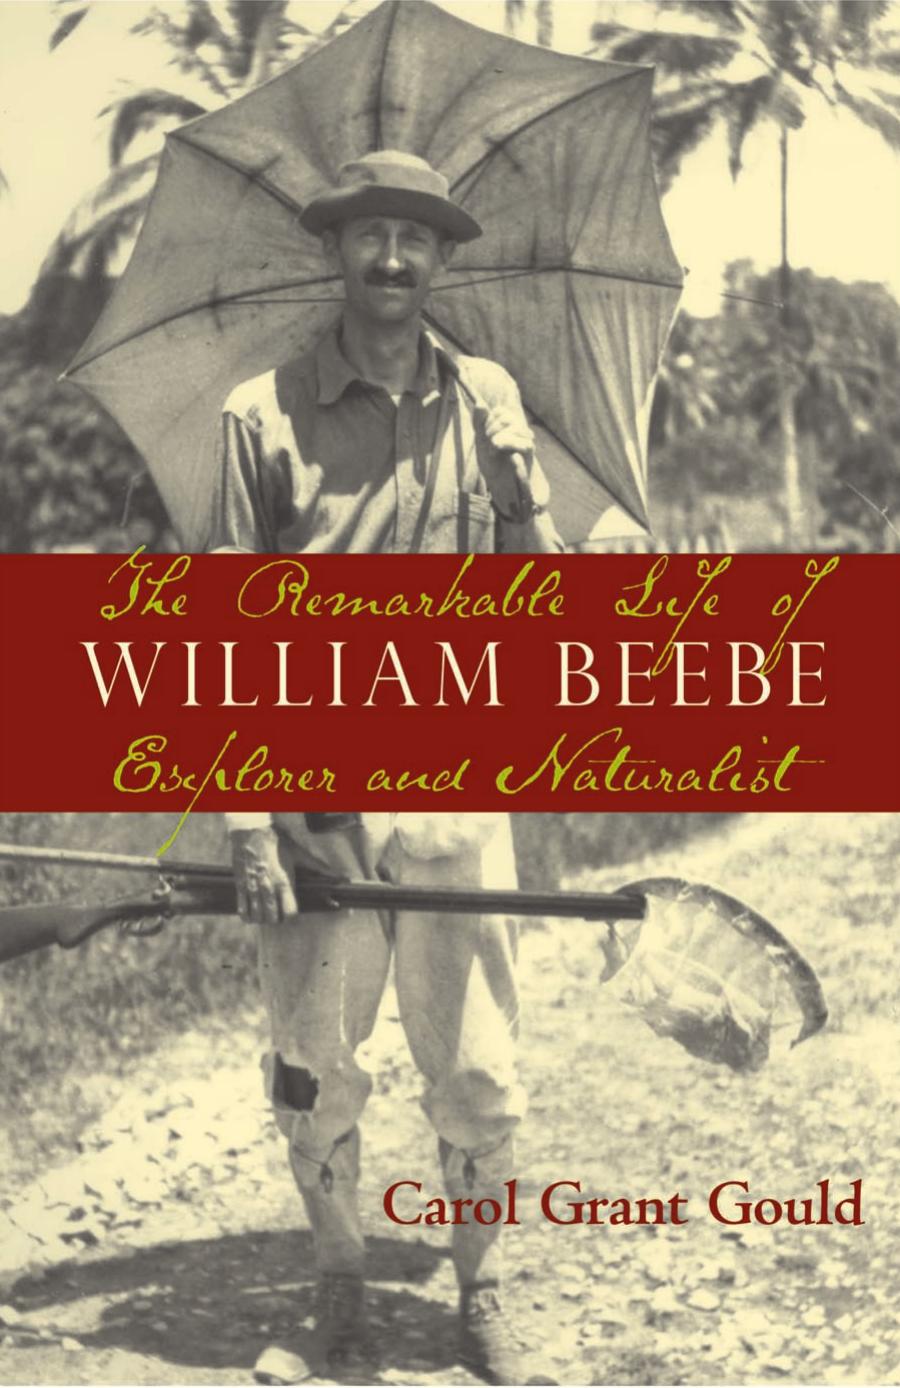 The Remarkable Life of William Beebe: Explorer and Naturalist by Carol Grant Gould